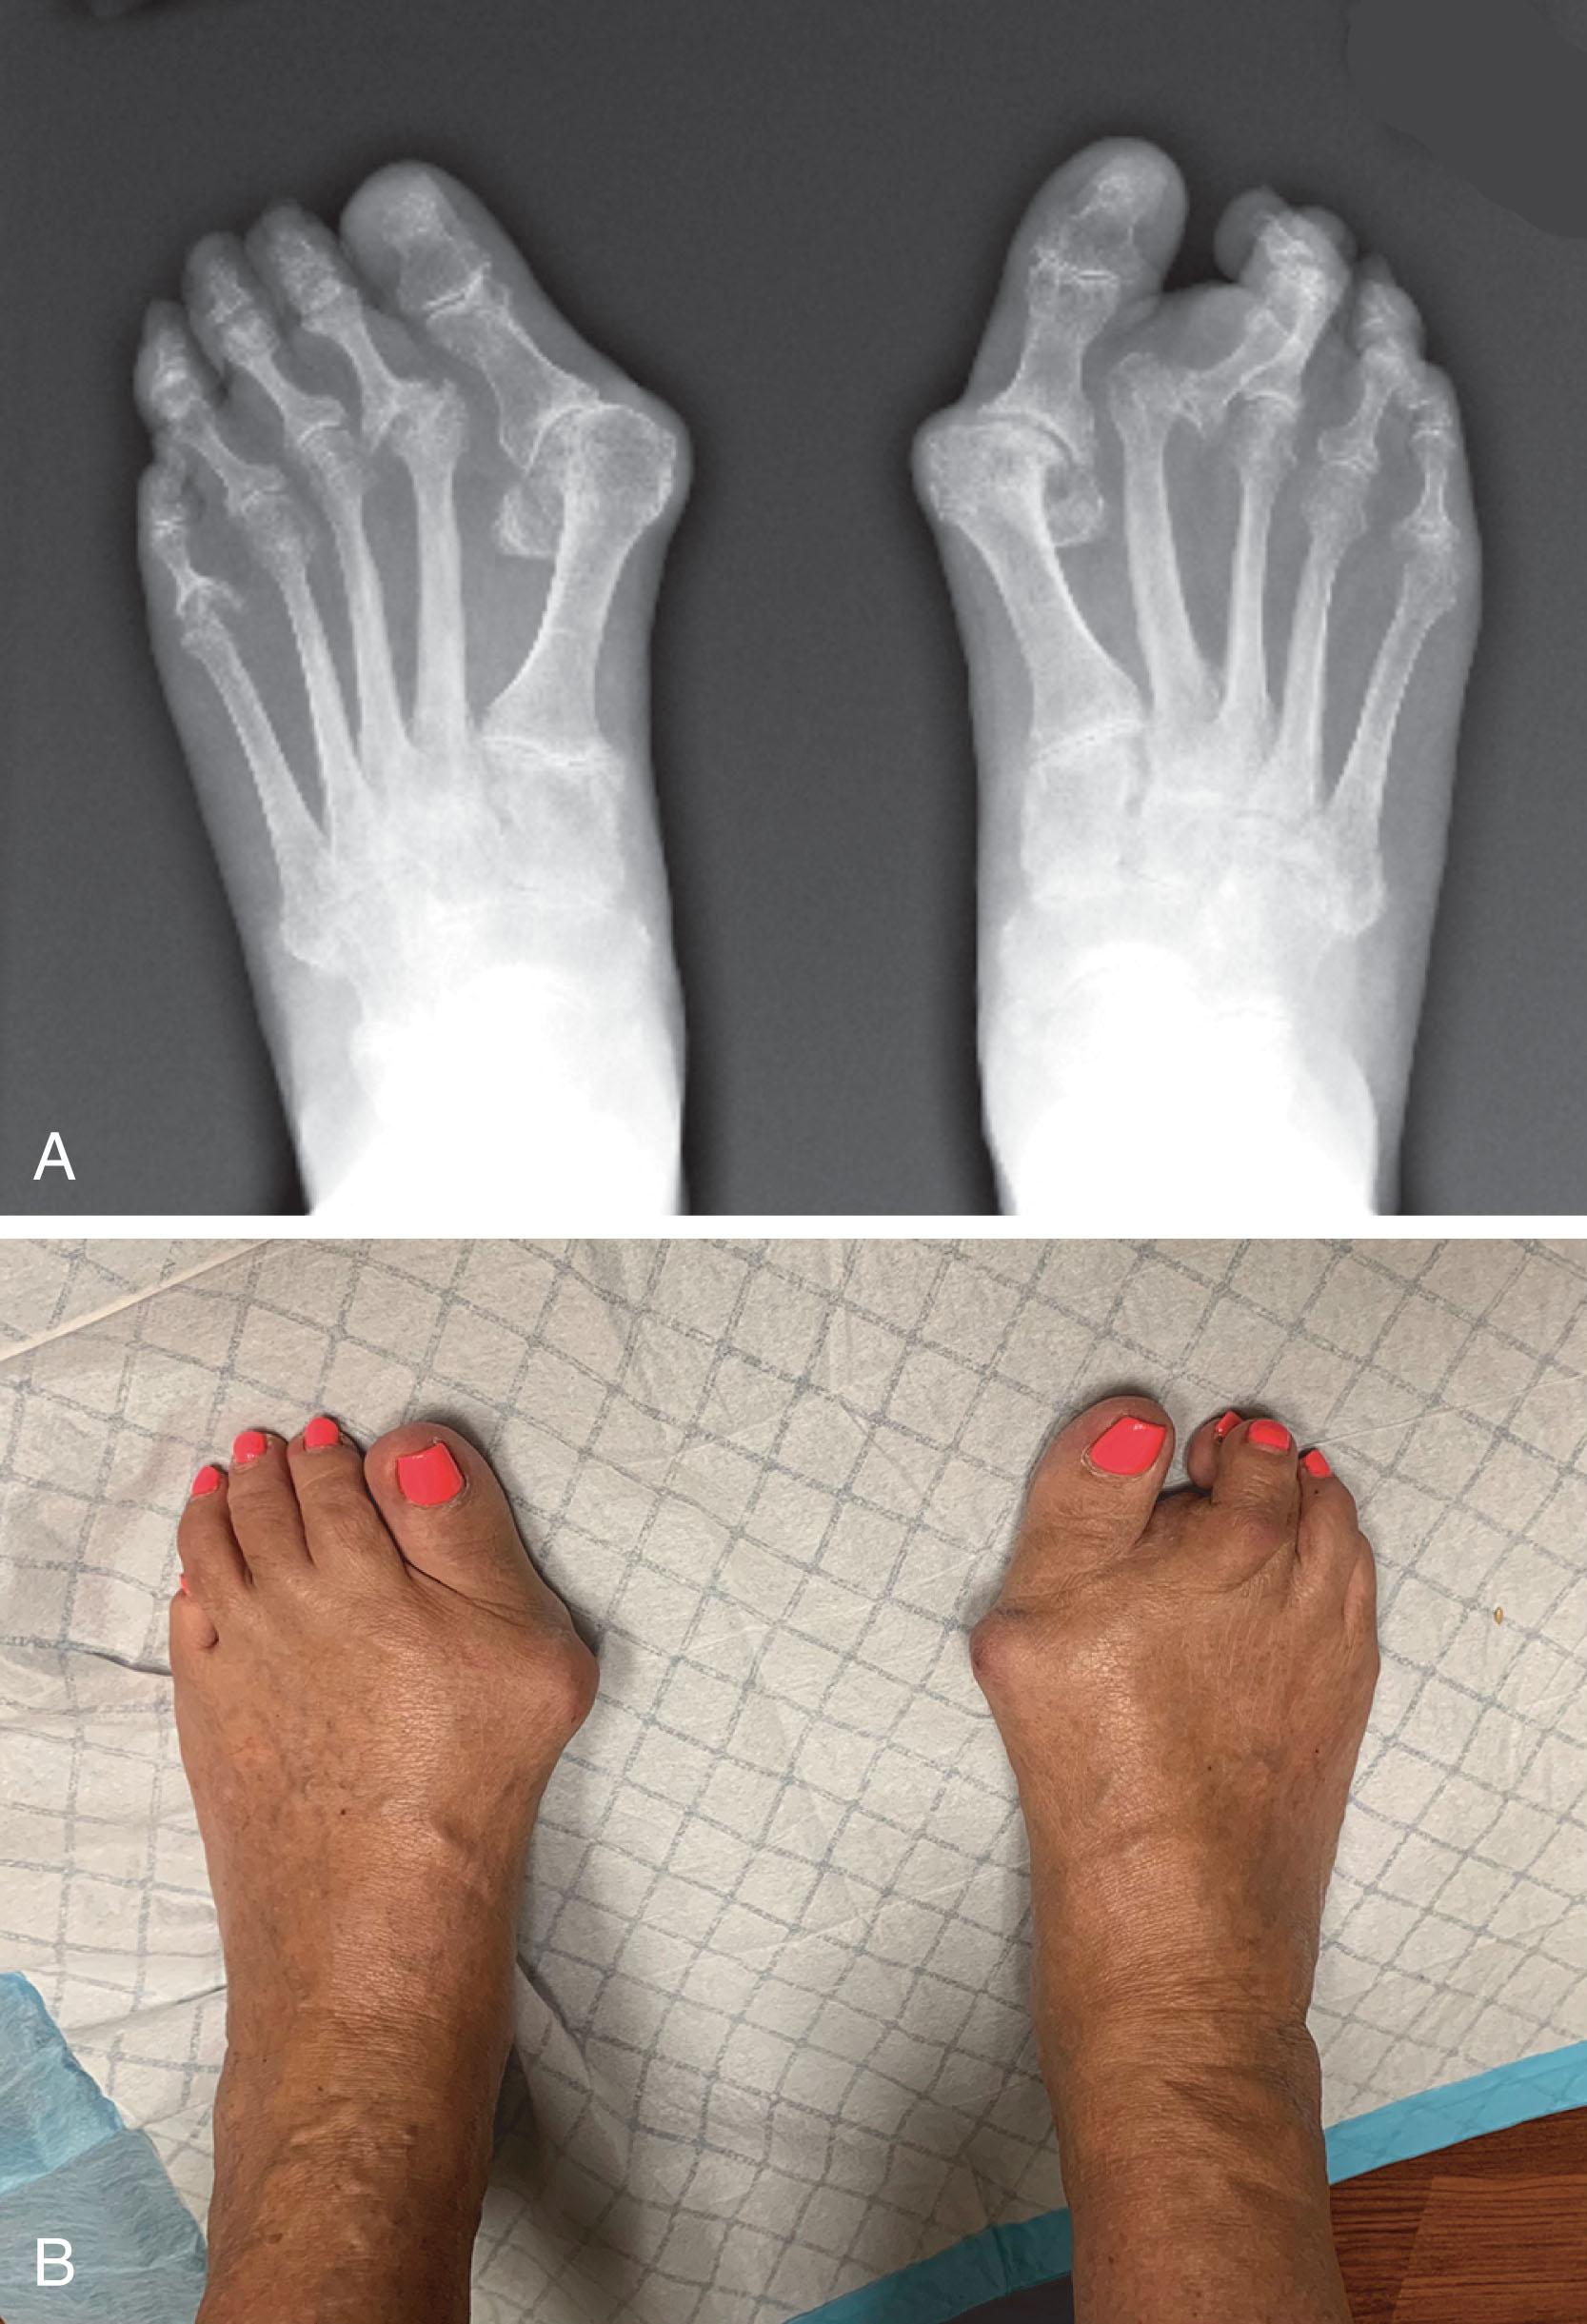 Fig. 21-25, A , Preoperative radiograph demonstrates right second metatarsophalangeal (MTP) joint dislocation, left fifth metatarsal head marginal erosion, hallux valgus deformities. B , Clinical photograph demonstrates hallux valgus deformities and right second metatarsophalangeal joint dislocation.